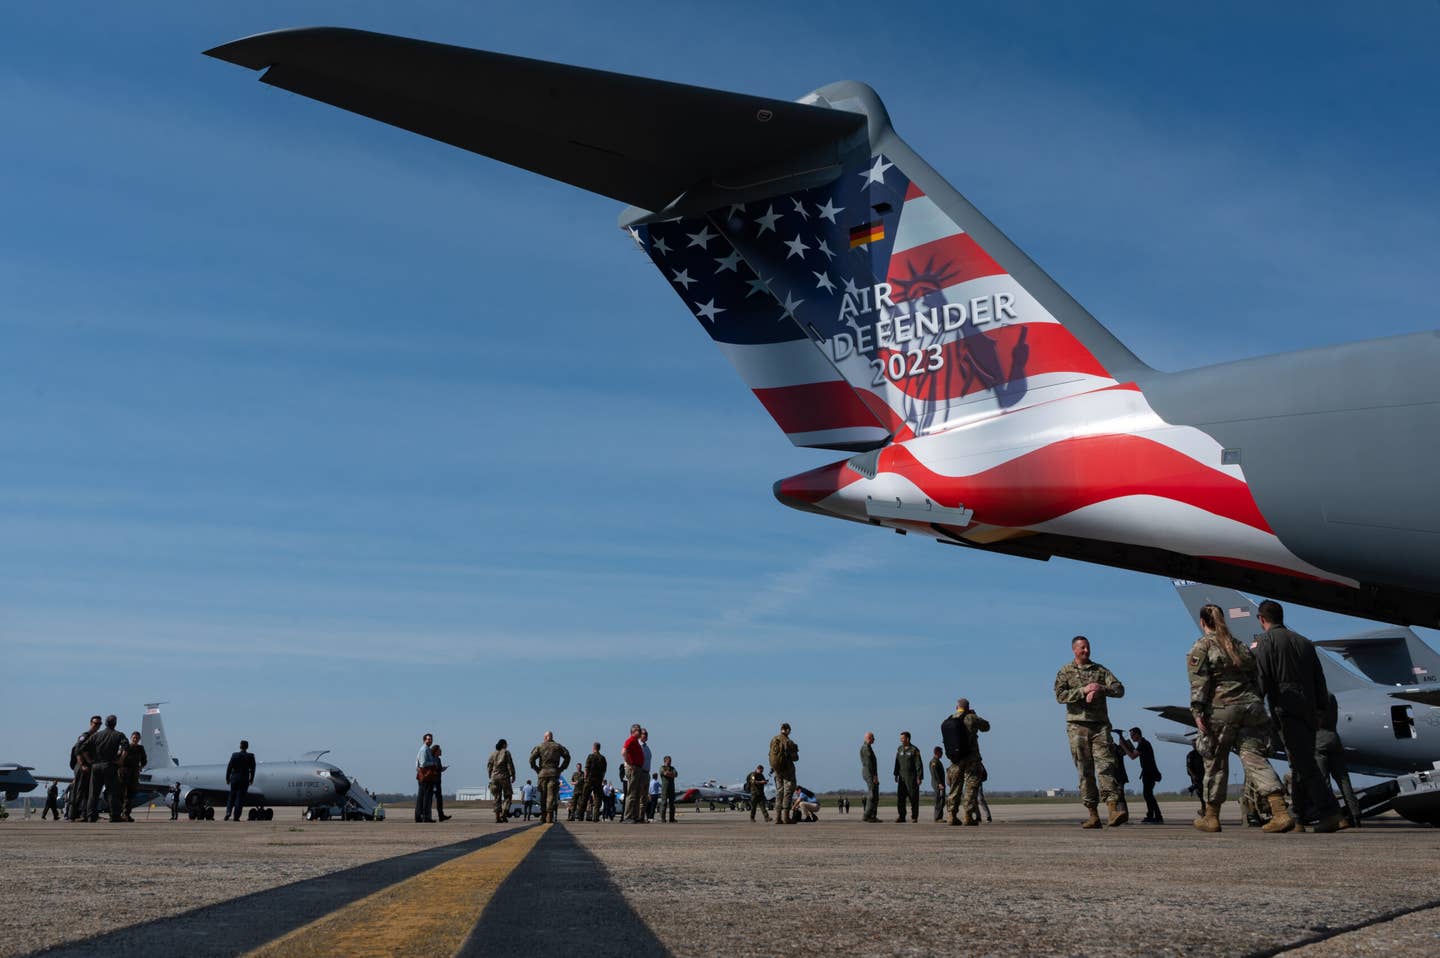 German and U.S. media and service members walk on the flight line during an Air Defender 2023 media event at Joint Base Andrews, Maryland, April 5, 2023. <em>Credit: U.S. Air National Guard photo by Tech. Sgt. Sarah M. McClanahan</em>